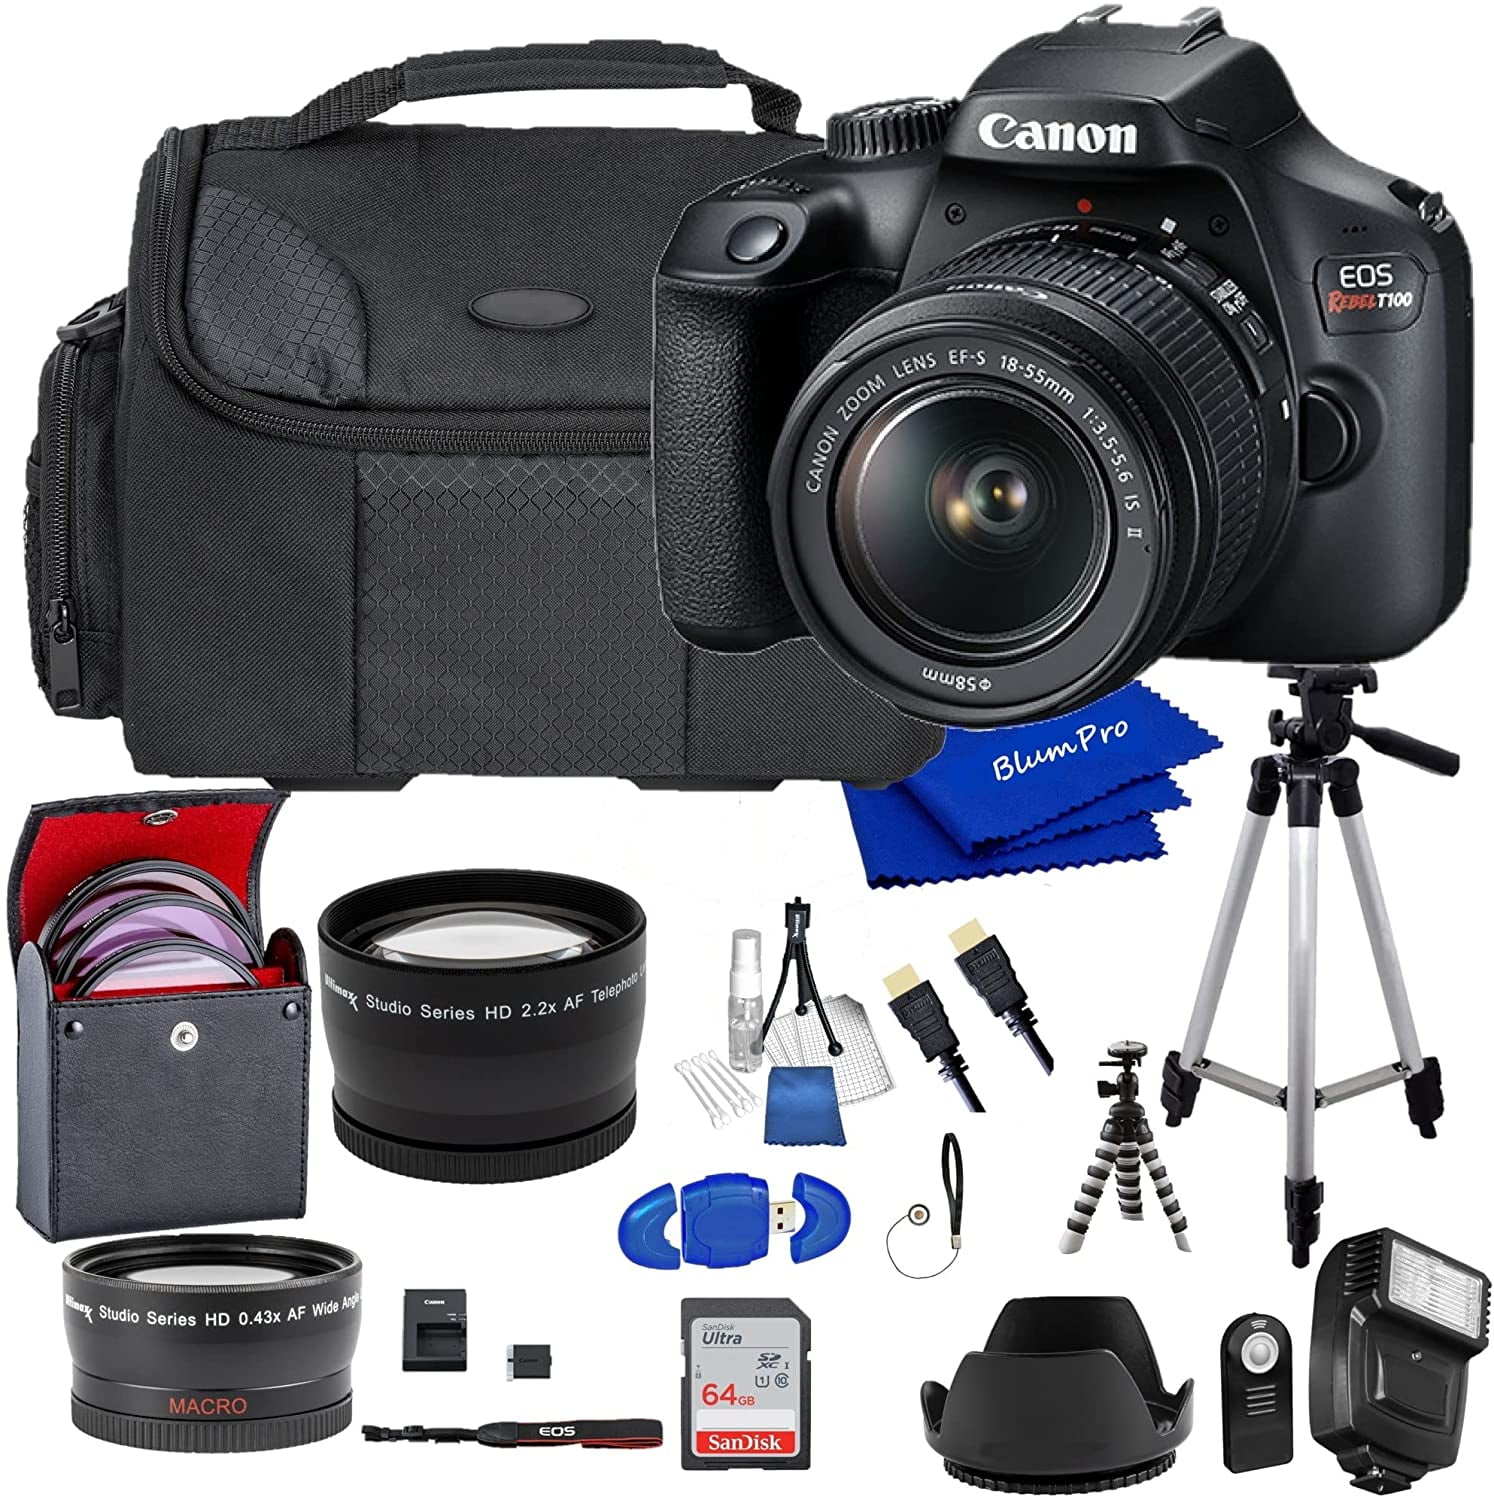 Canon EOS 2000D Rebel T7 DSLR Camera with 18-55mm f/3.5-5.6 Zoom Lens,32GB  Memory, Case,Tripod w/Hand Grip and More28pc Bundle 